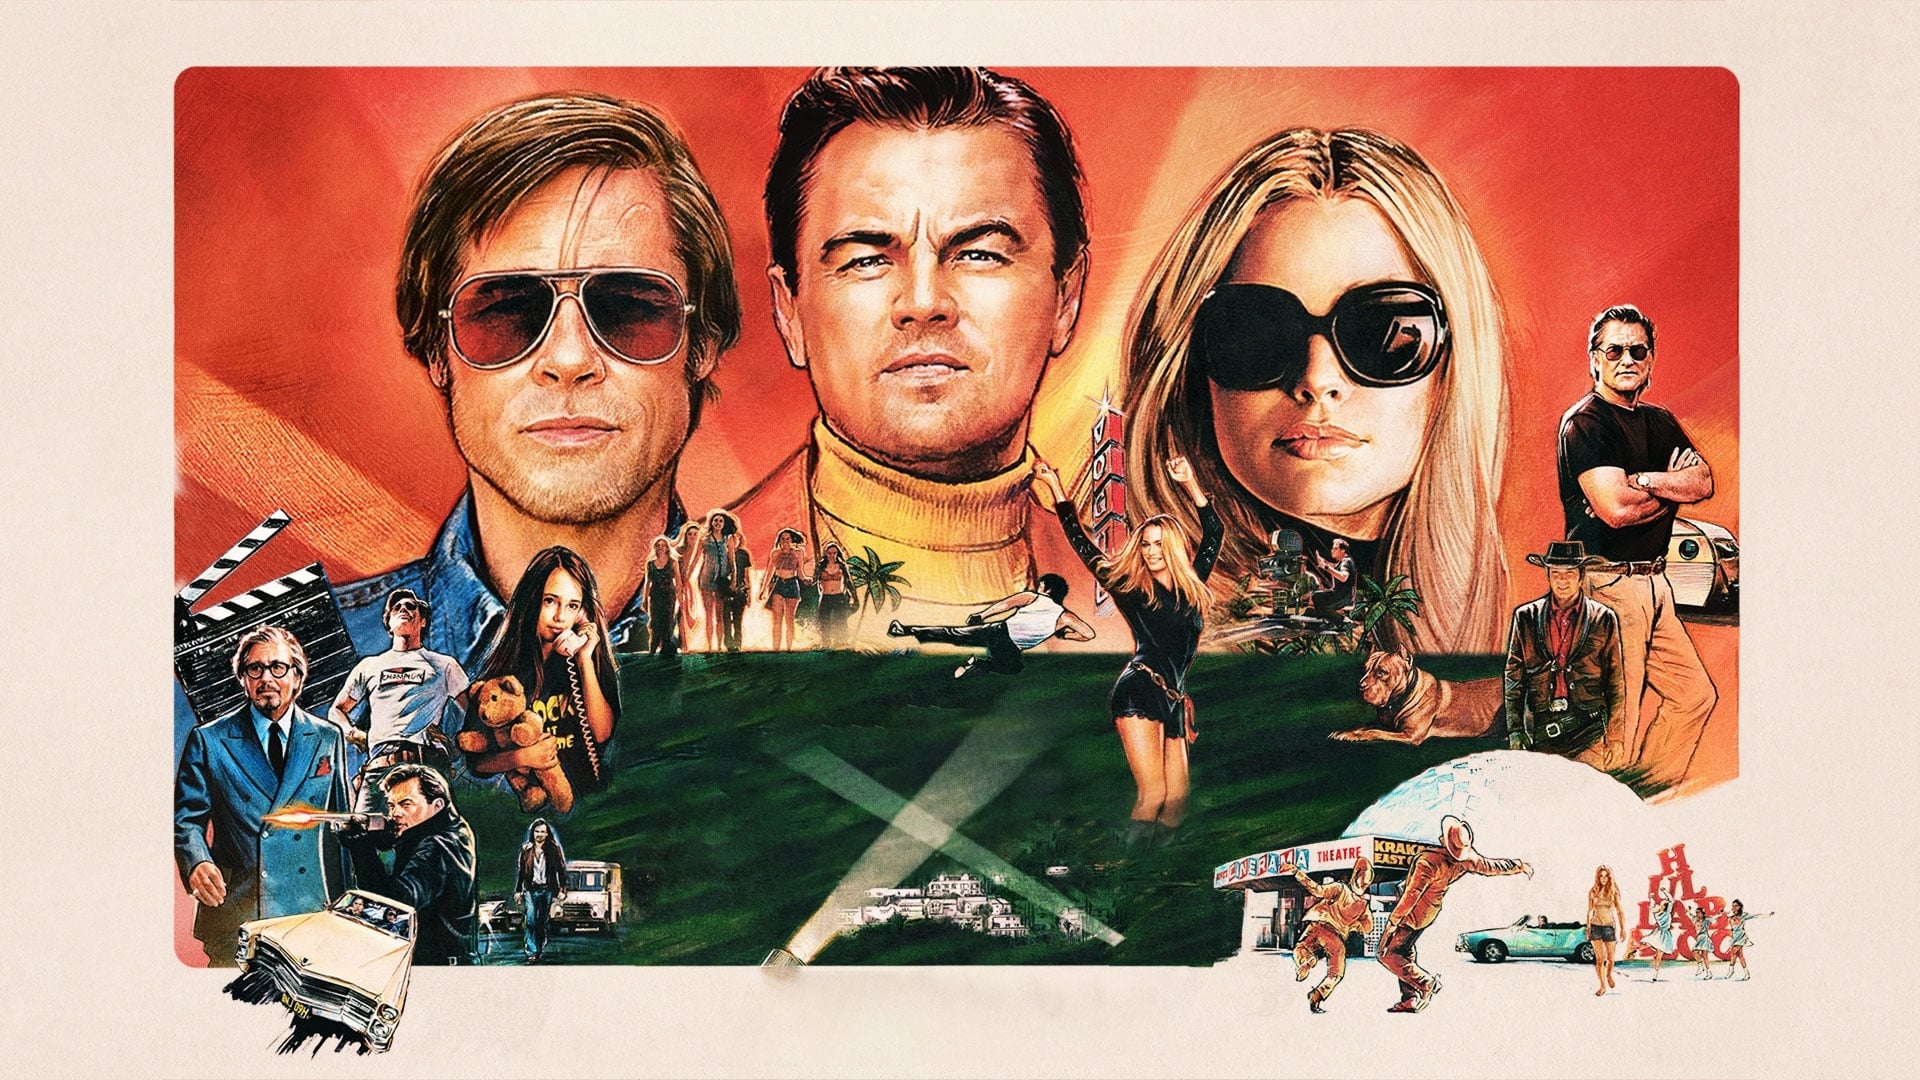 Image du film Once Upon a Time... in Hollywood (version longue) aqlygzoikai6aaibaeekpiwo5ncjpg